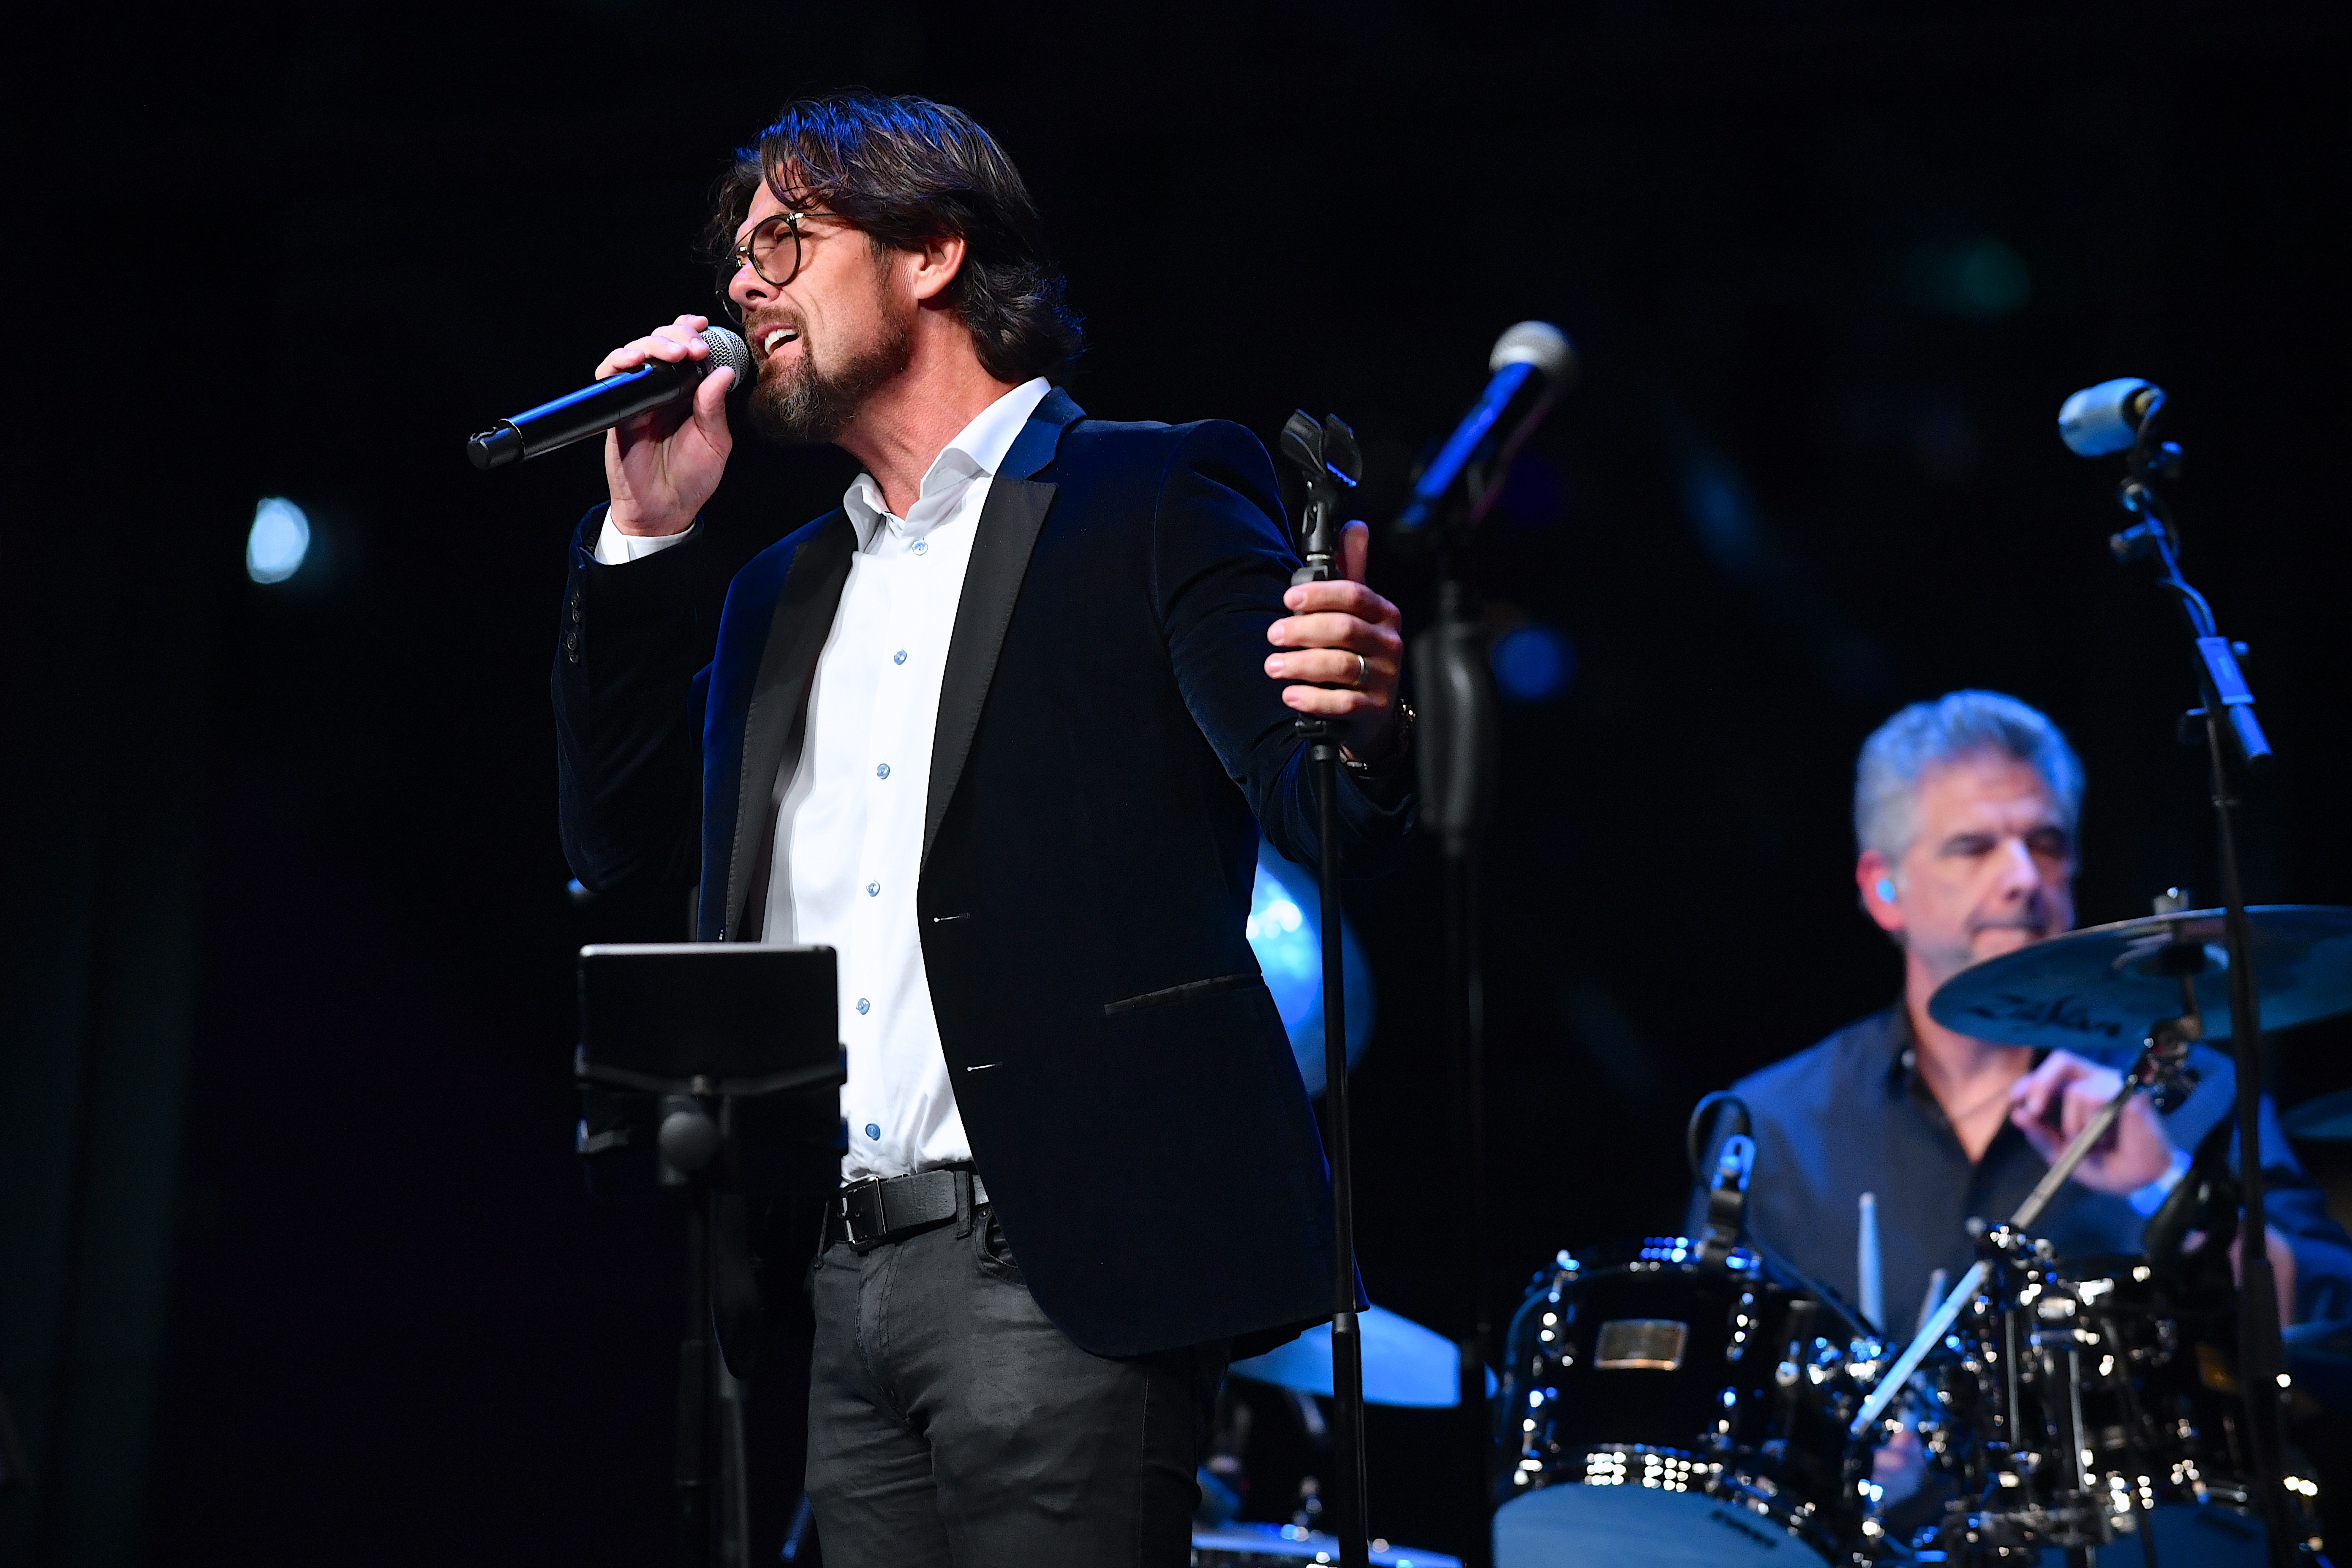 Jason Crabb performs on stage during the afterparty for the premiere of Lionsgate